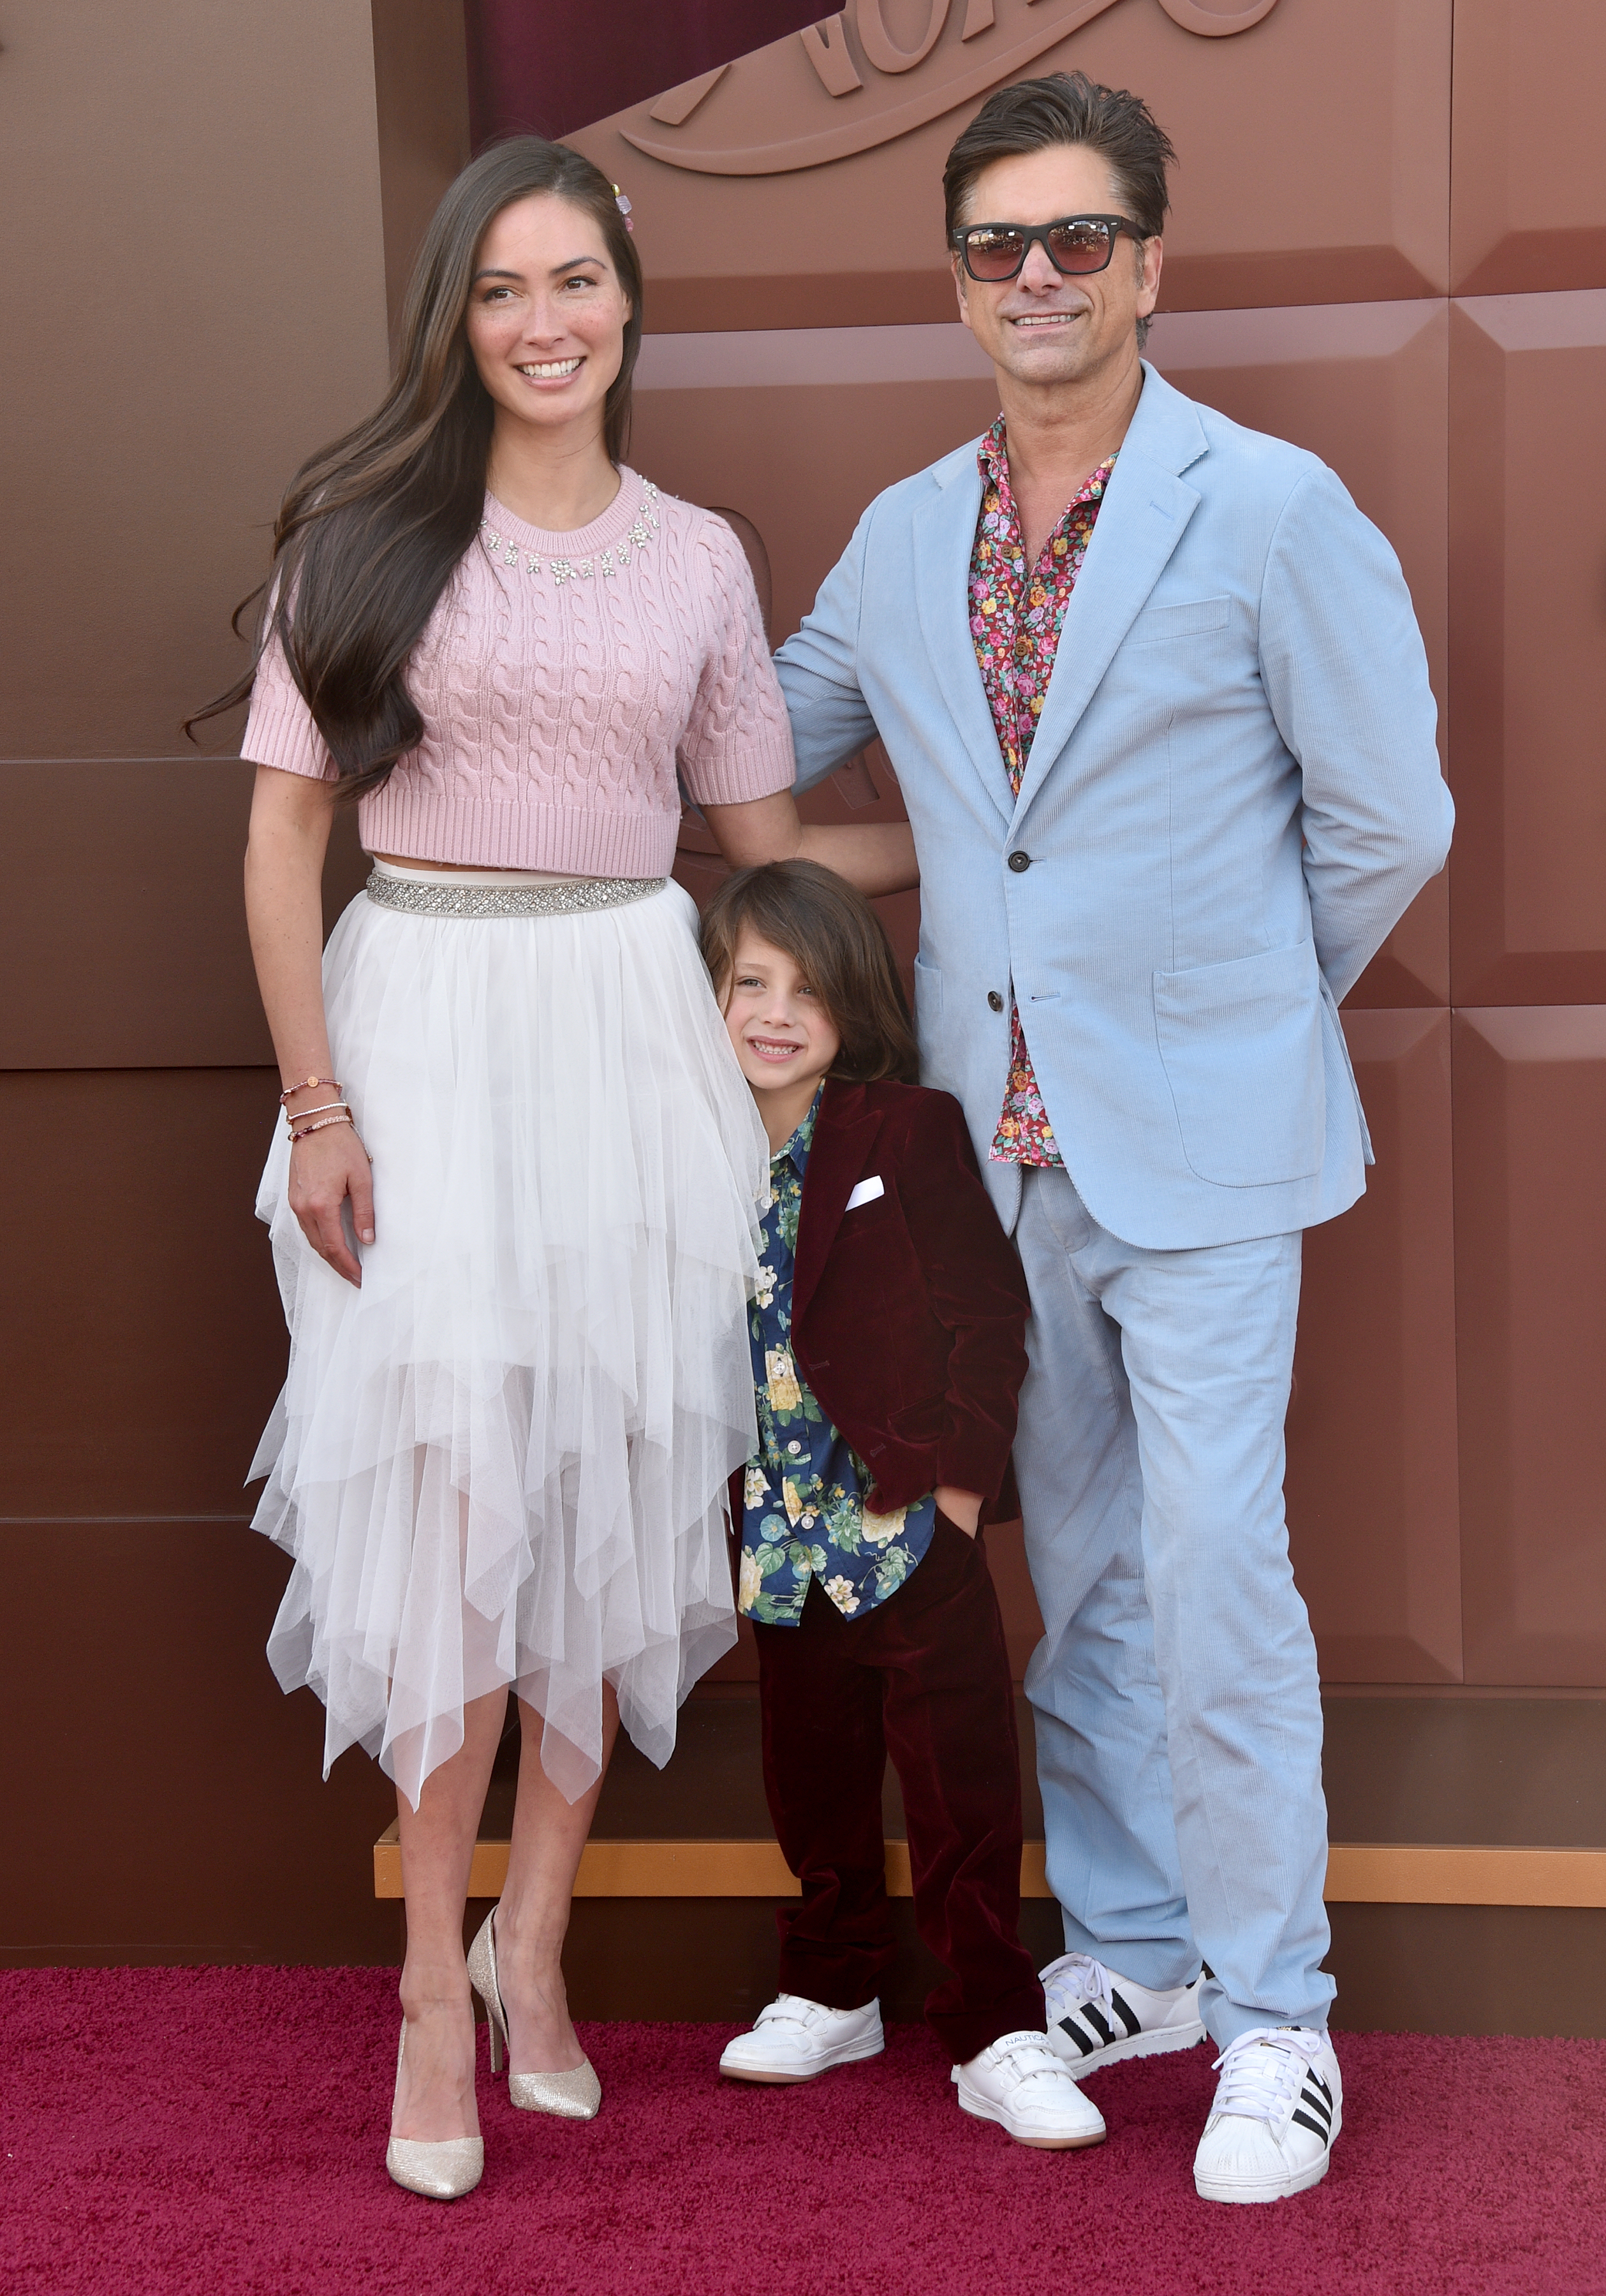 Caitlin McHugh, Billy Stamos, and John Stamos at the "Wonka" premiere in Los Angeles, California on December 10, 2023 | Source: Getty Images